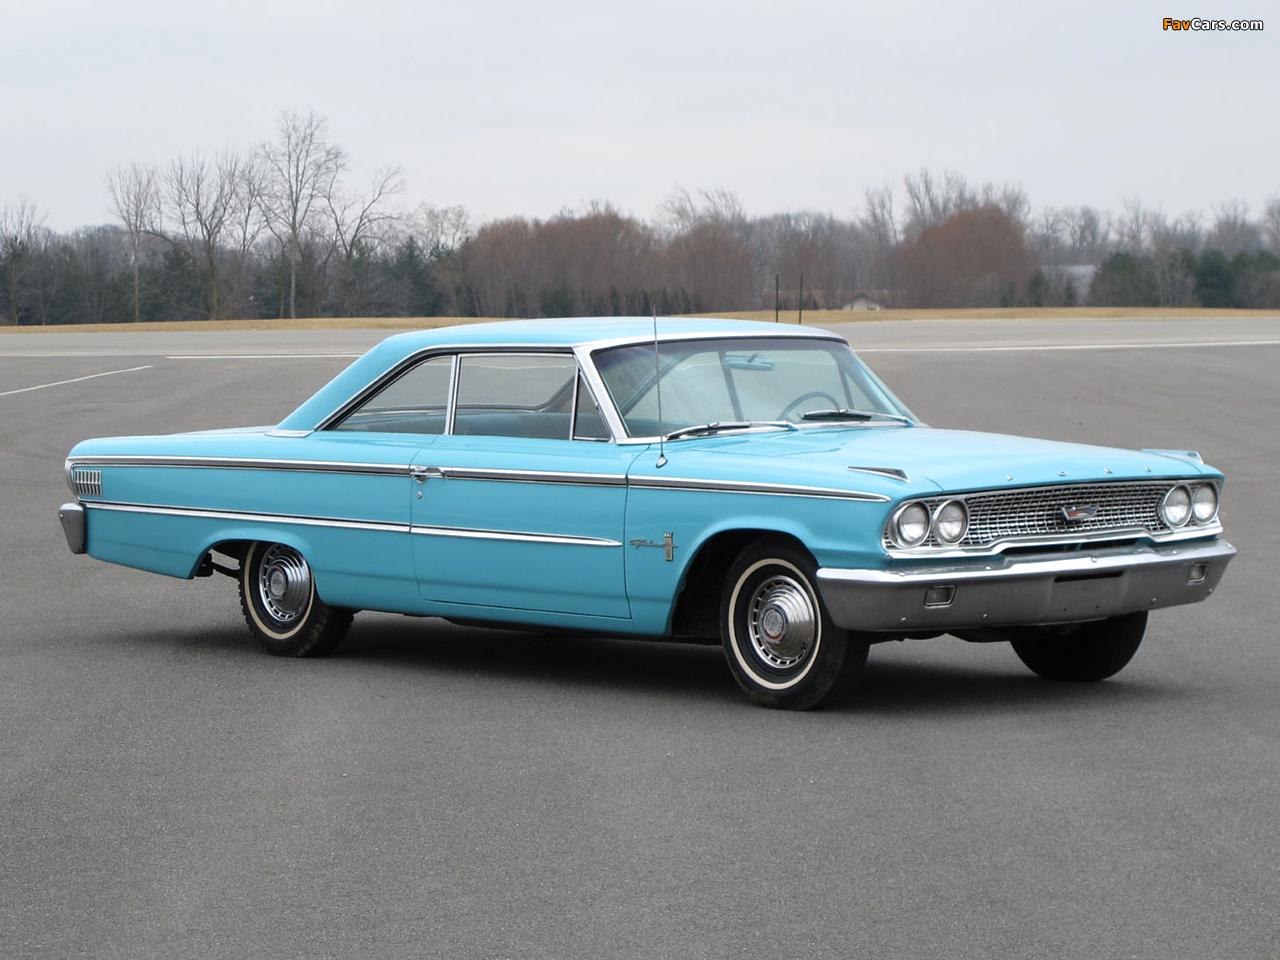 Images of Ford Galaxie 500 Fastback Hardtop 1963 (1280 x 960)